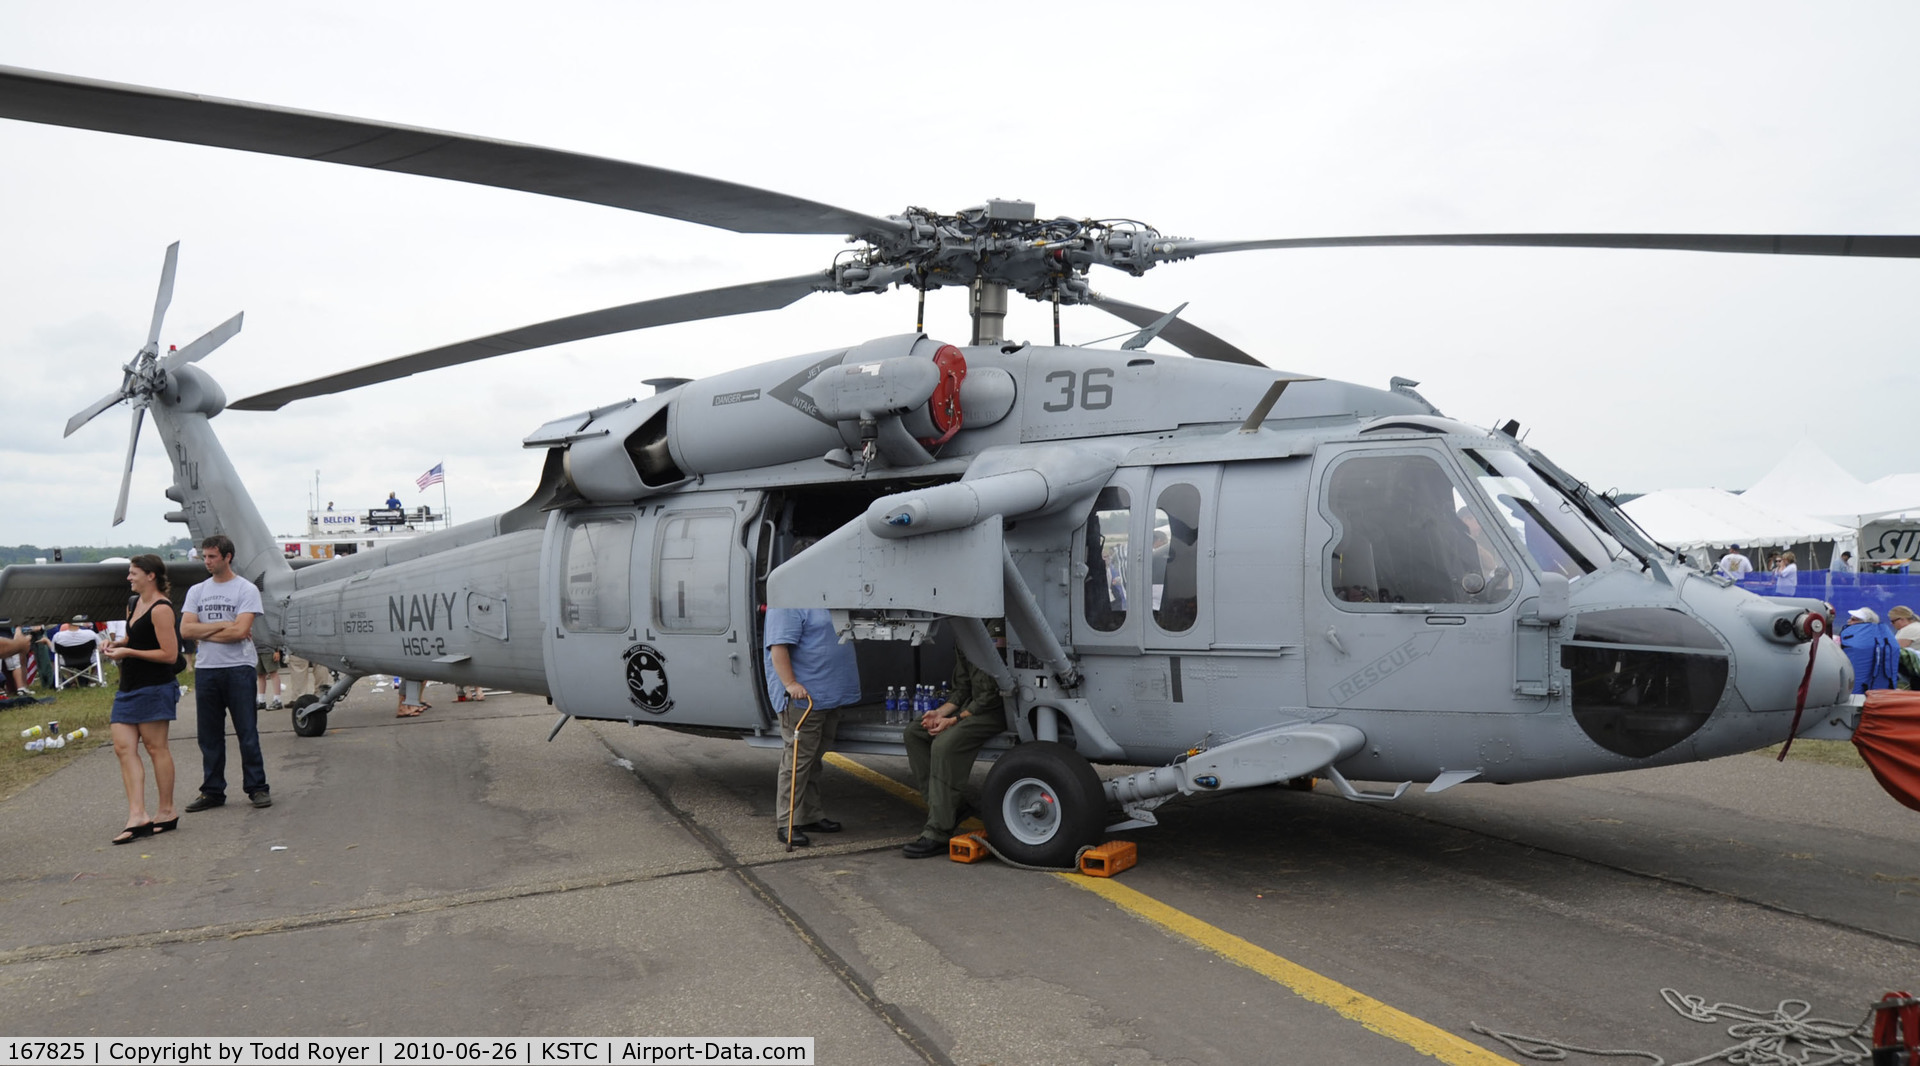 167825, Sikorsky MH-60S SeaHawk C/N 703087, on display at the 2010 Great Minnesota Air Show